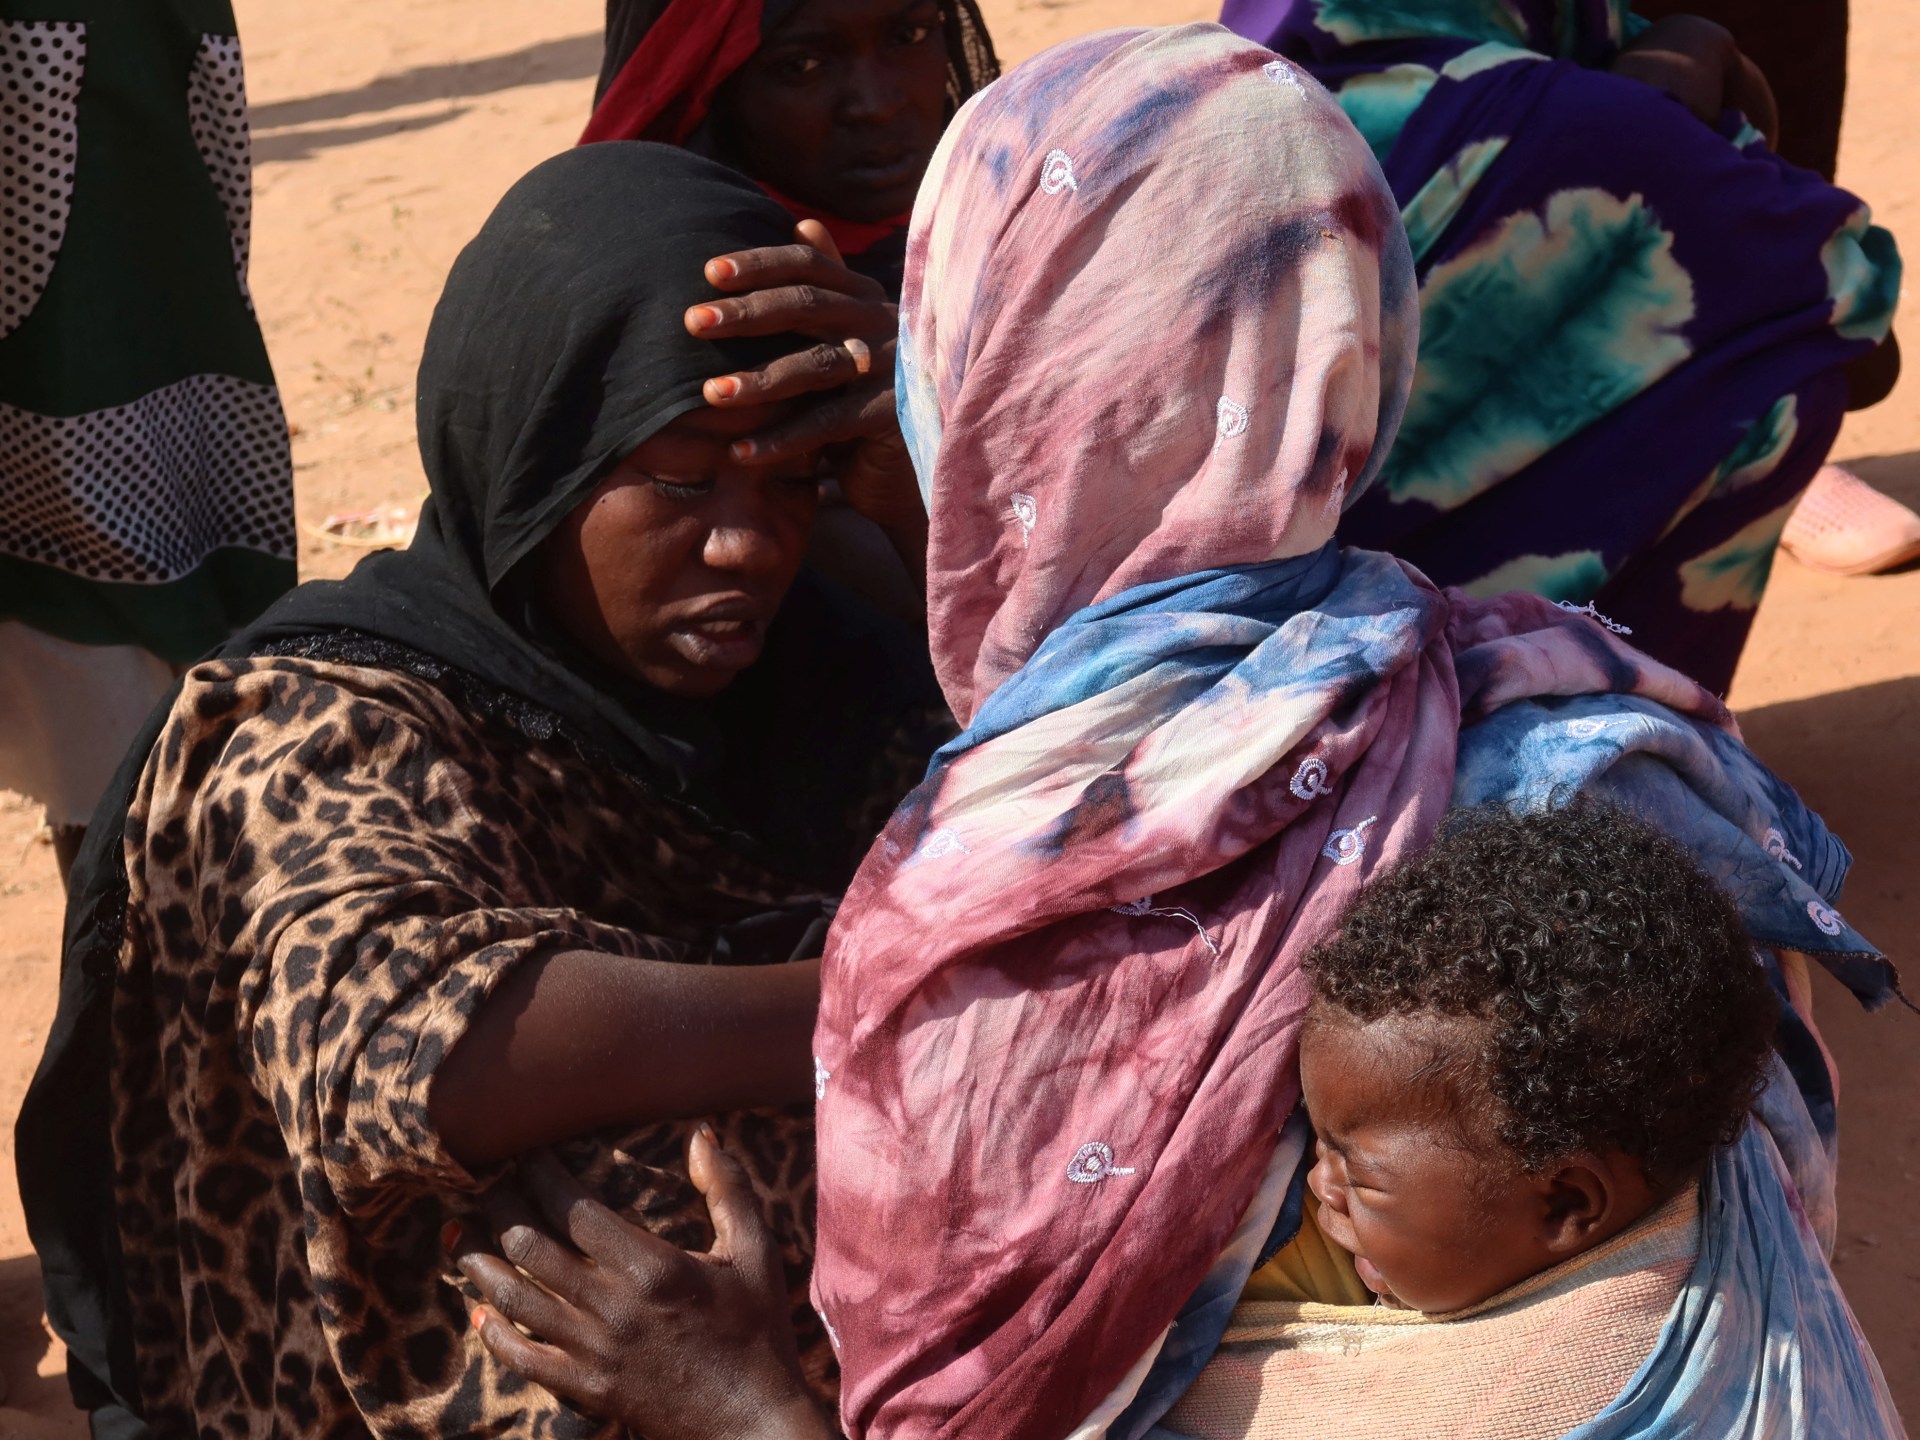 The UN must not abandon Sudan amid war and atrocities | Opinions #abandon #Sudan #war #atrocities #Opinions